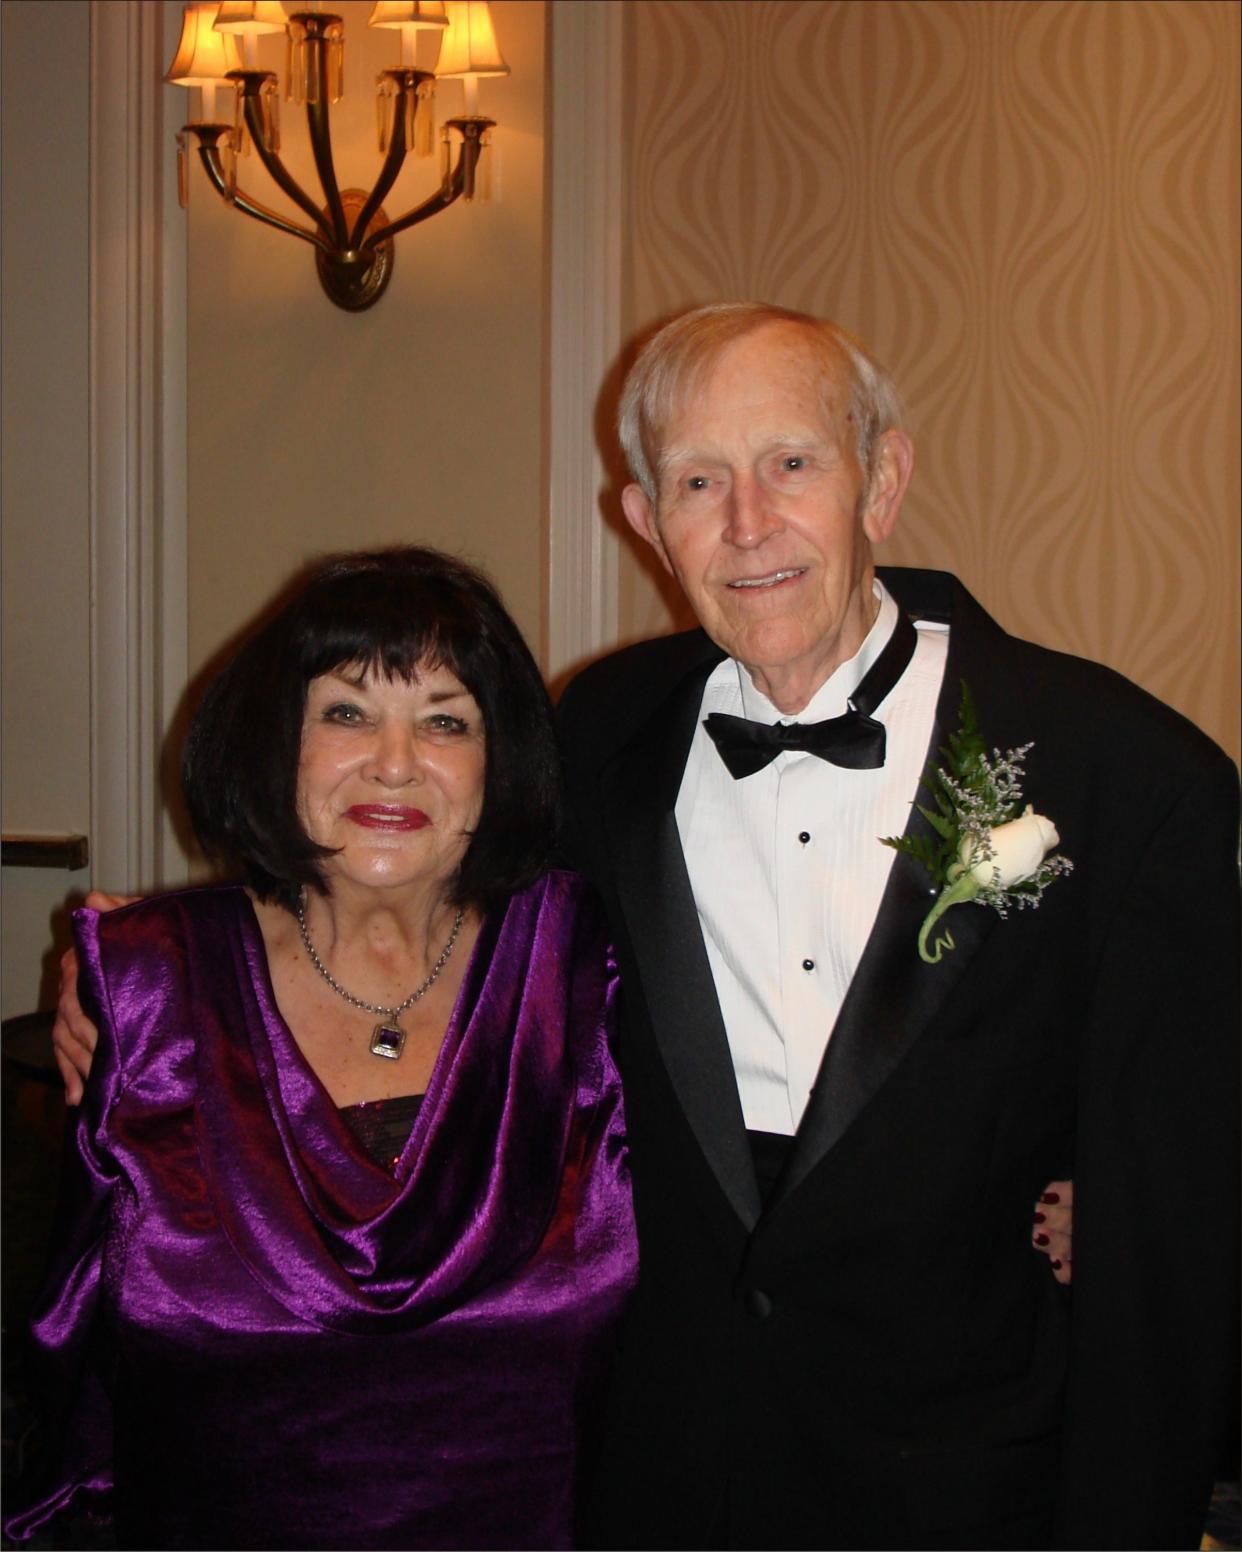 Paul and Judy Hatcher at the 2015 Virginia Sports Hall of Fame and Museum induction ceremony in Portsmouth, Virginia.